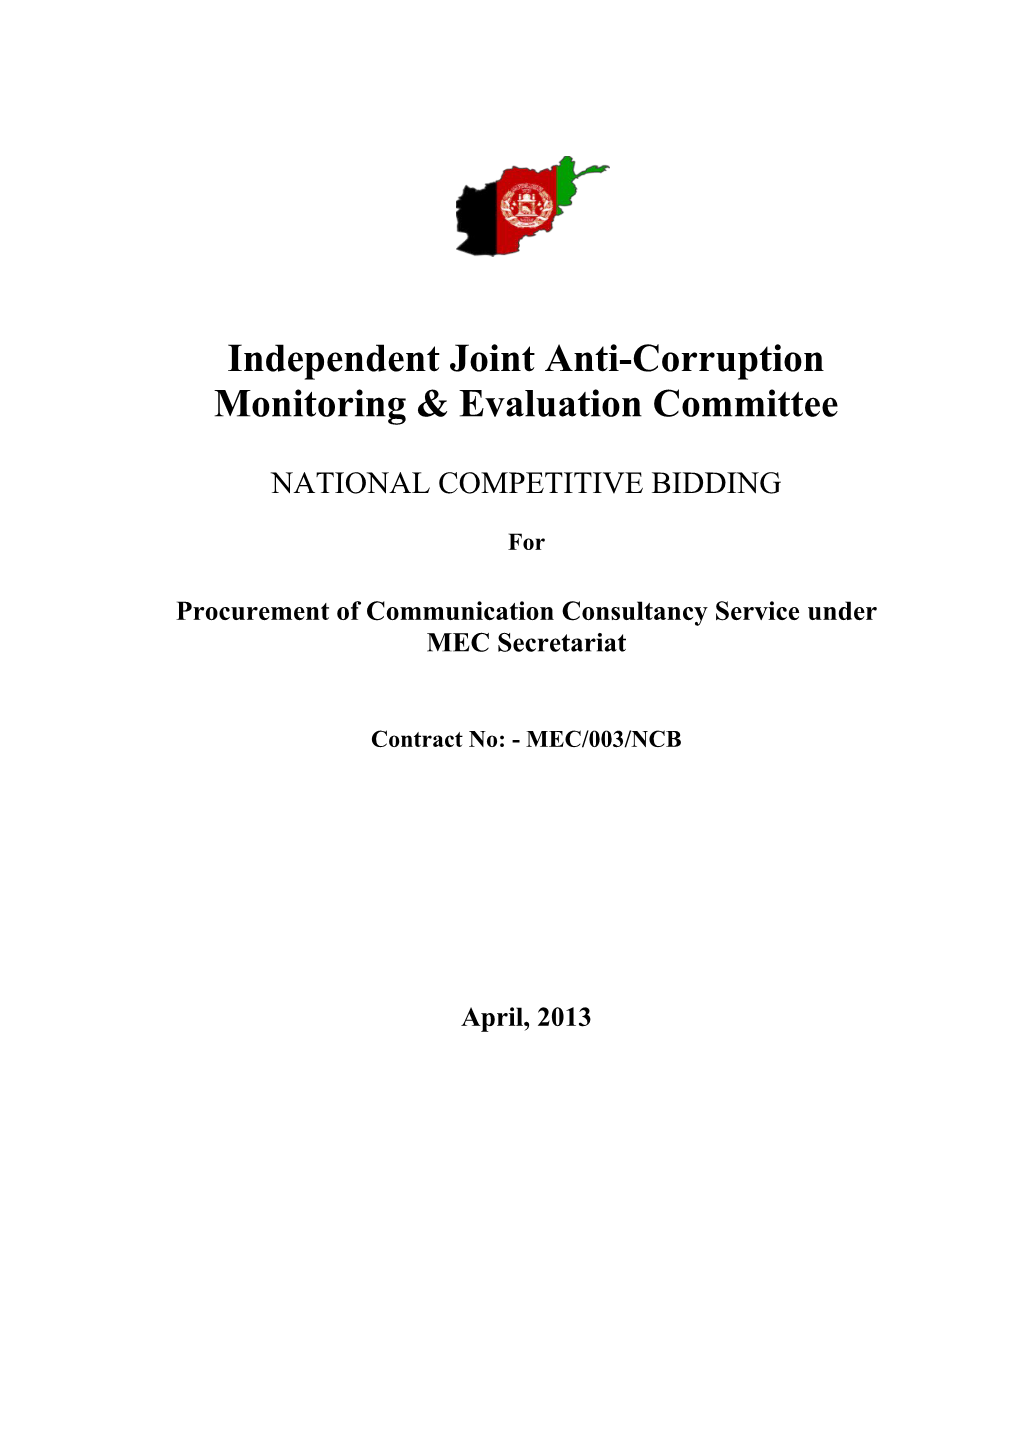 Independent Joint Anti-Corruption Monitoring & Evaluation Committee